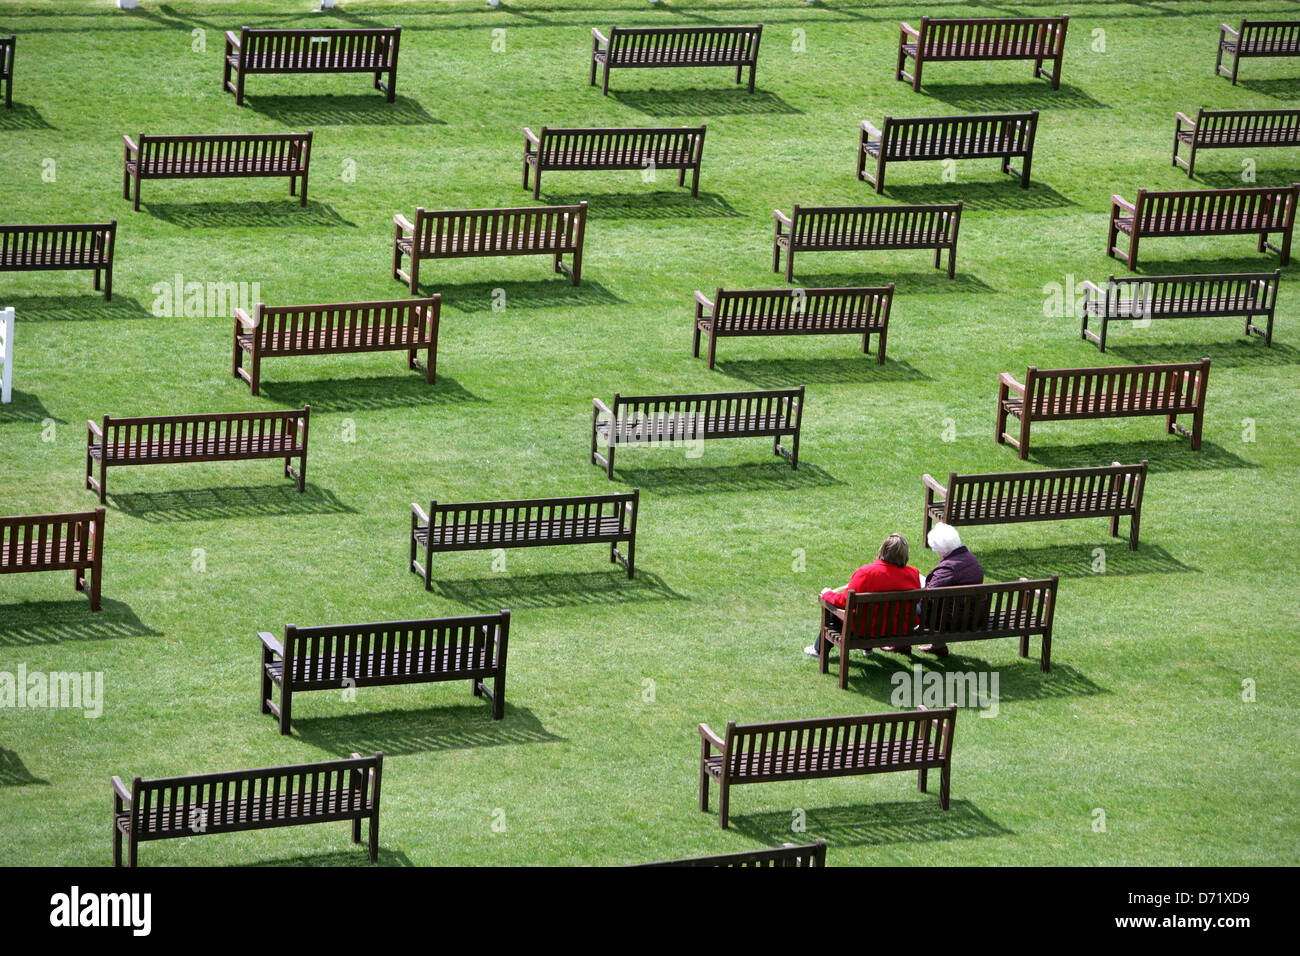 A couple sat in a sea of garden benches on one of the first Race days in April 2013 at Newbury Racecourse, UK. Stock Photo